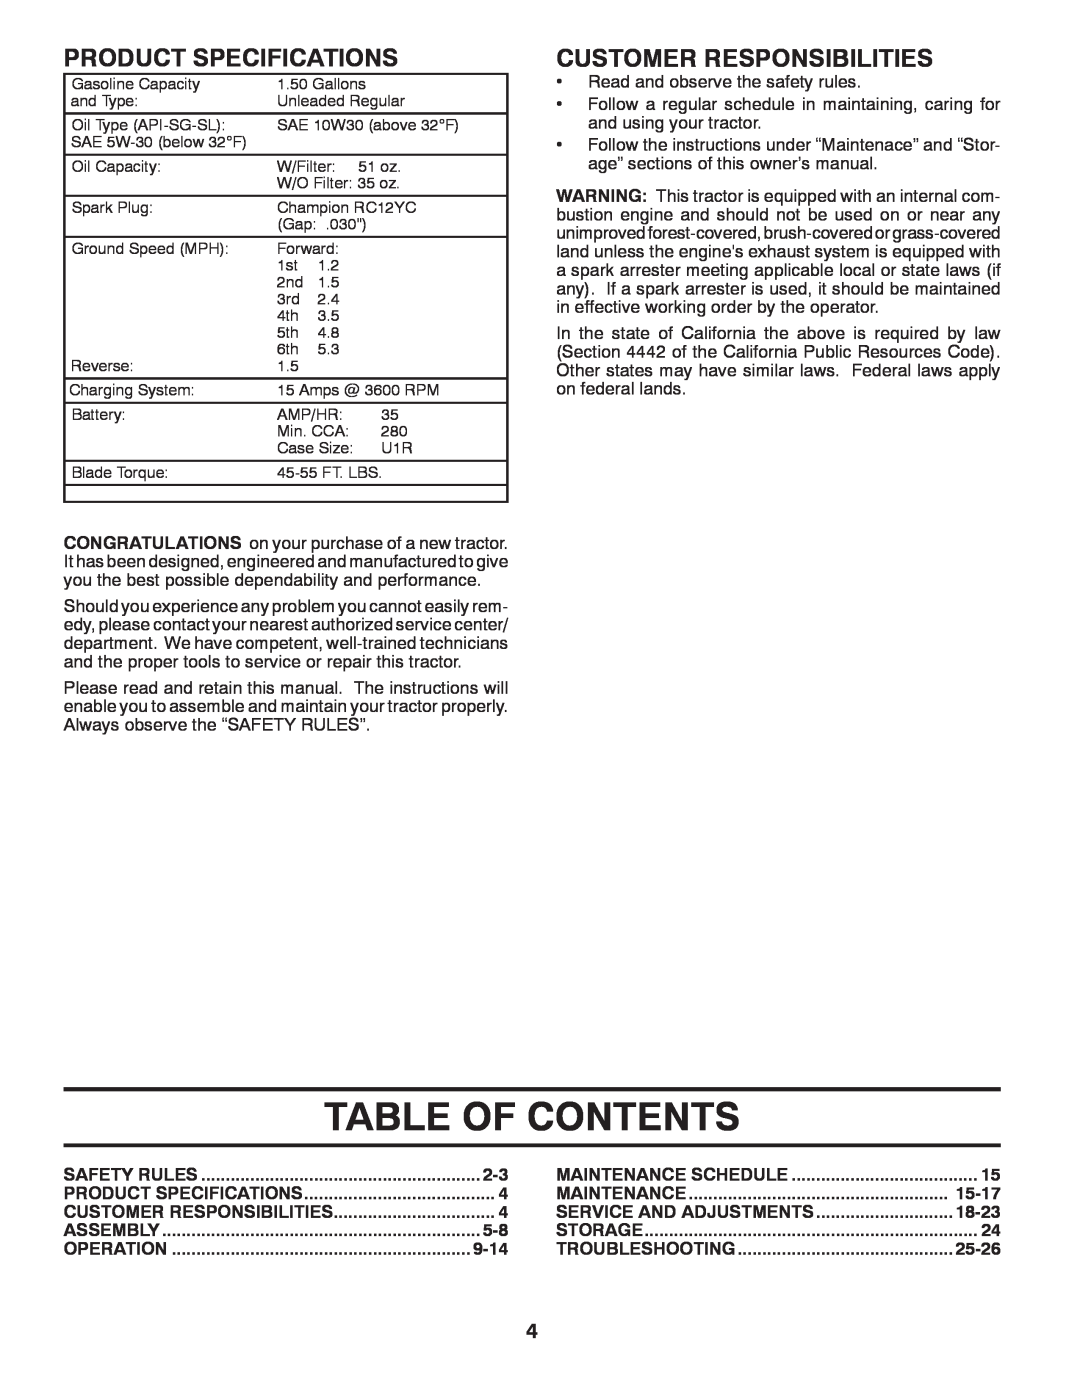 Husqvarna LT1597 manual Table Of Contents, Product Specifications, Customer Responsibilities, 9-14, 15-17, 18-23, 25-26 